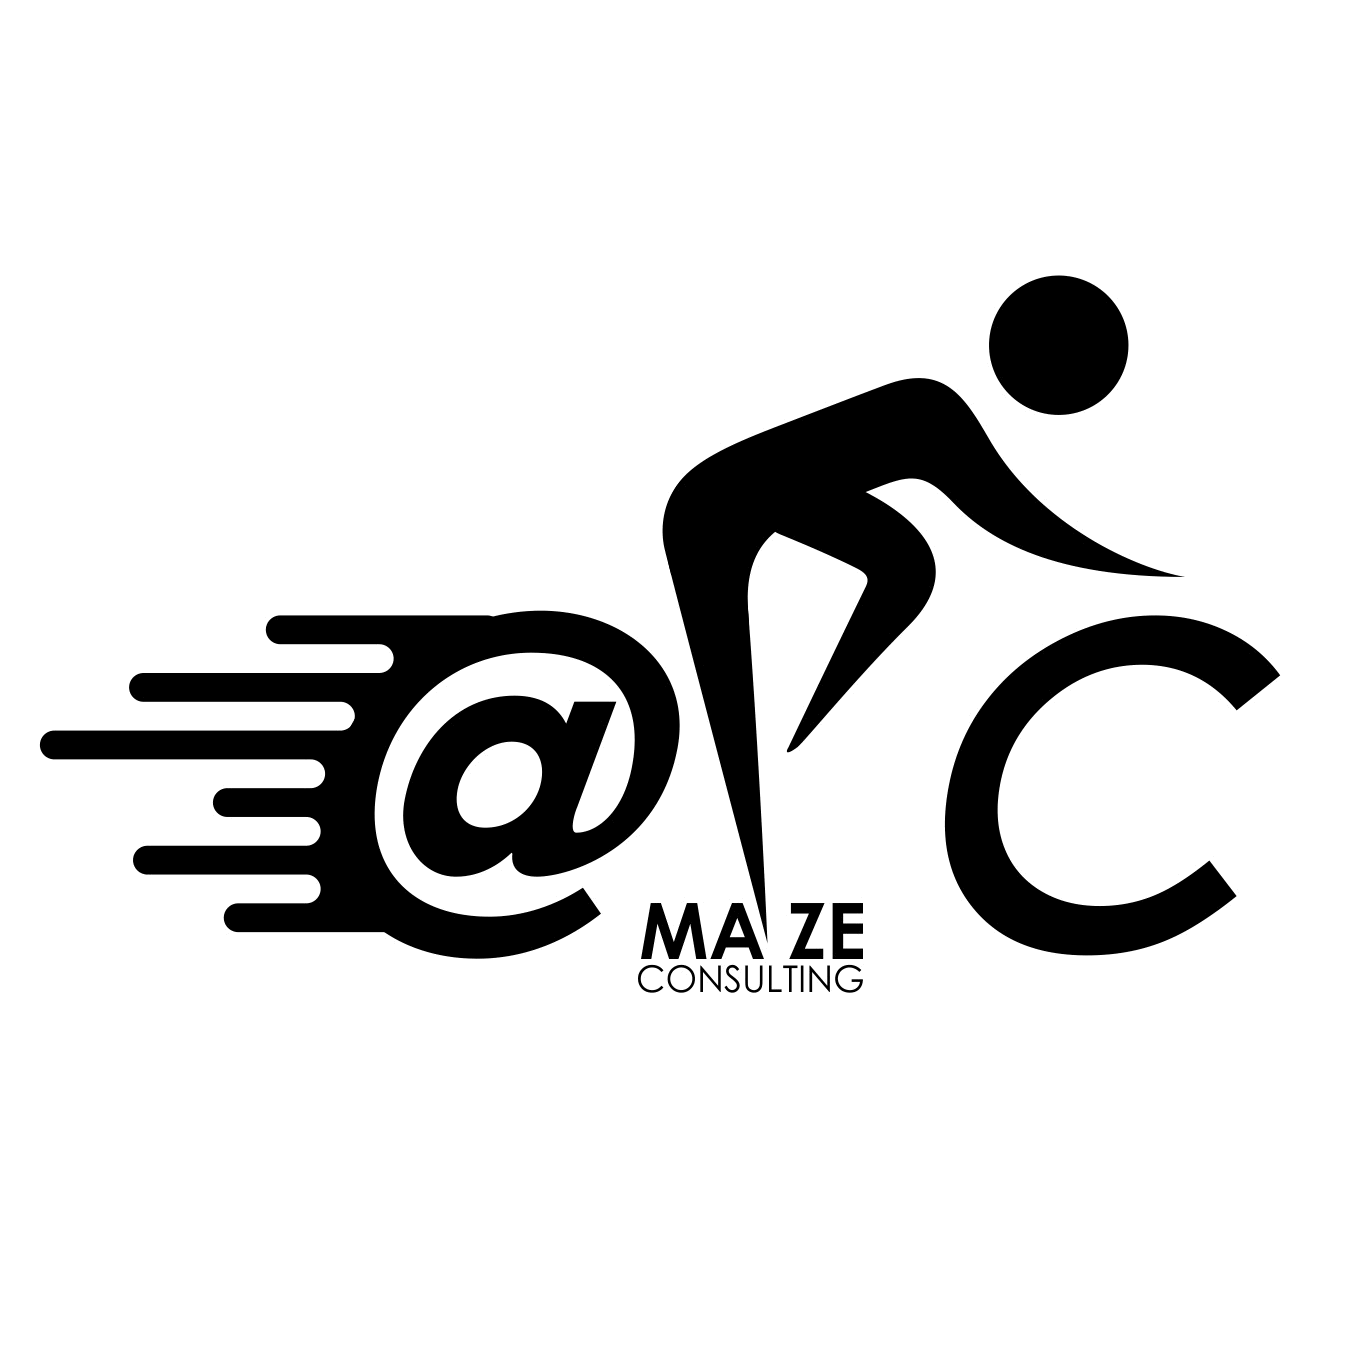 @maze Consulting